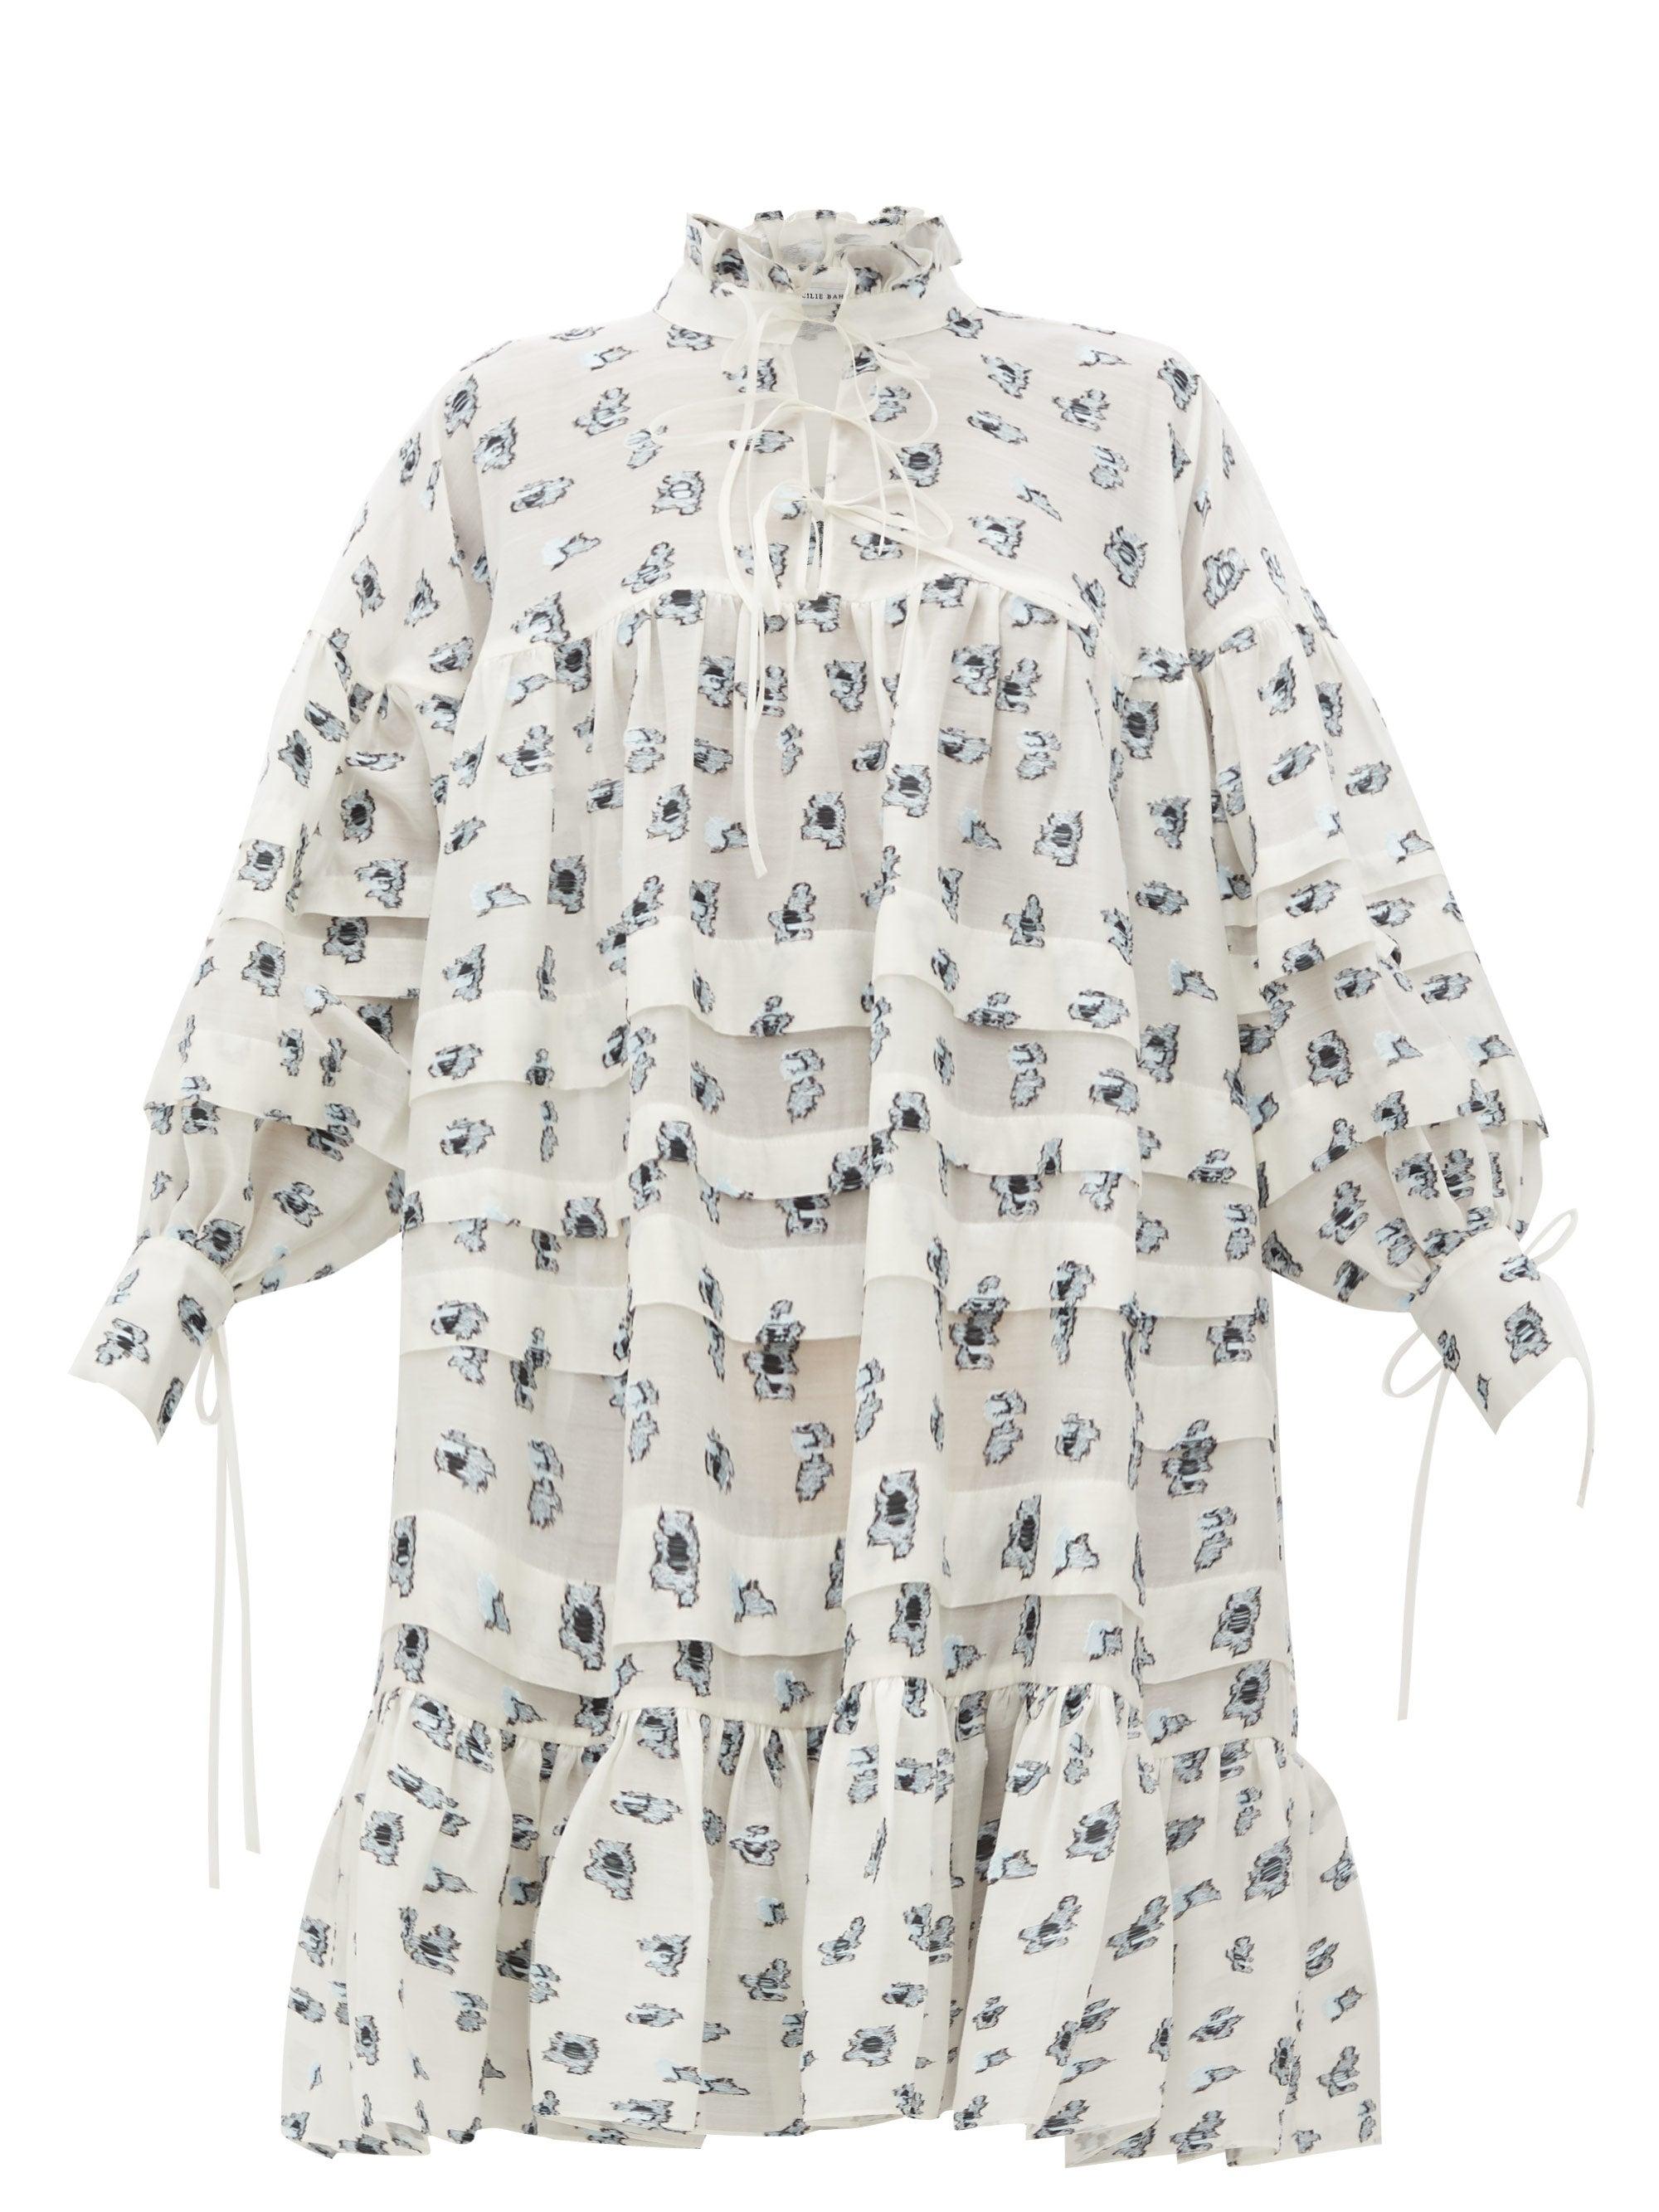 Cecilie Bahnsen Macy Oversized Pleated Rose Fil-coupé Shirt Dress in White - Lyst